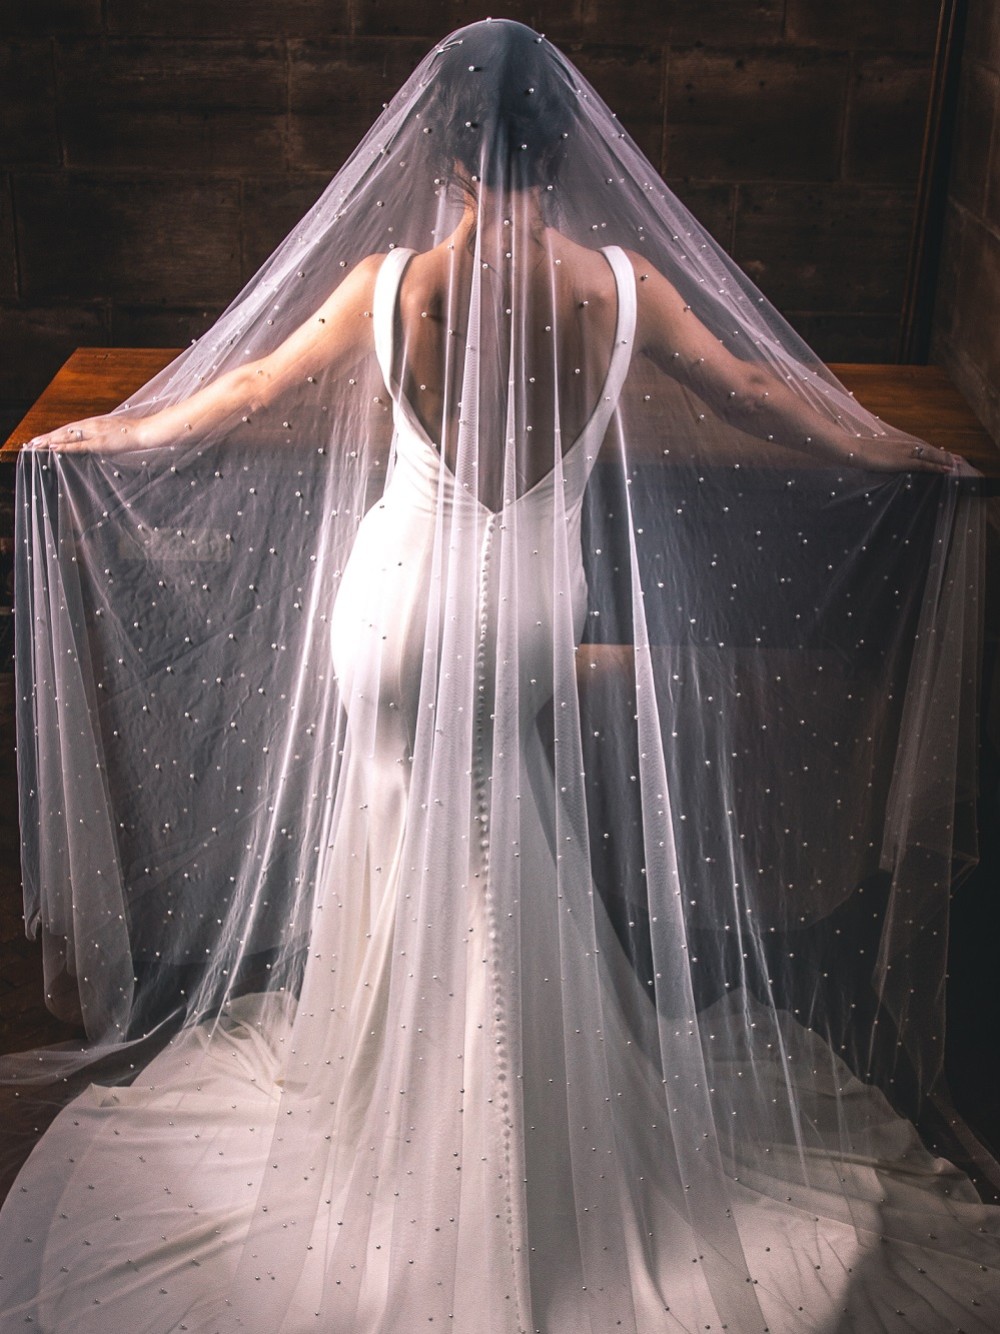 Photograph of Perfect Bridal Ivory Two Tier Heavily Embellished Pearl Veil